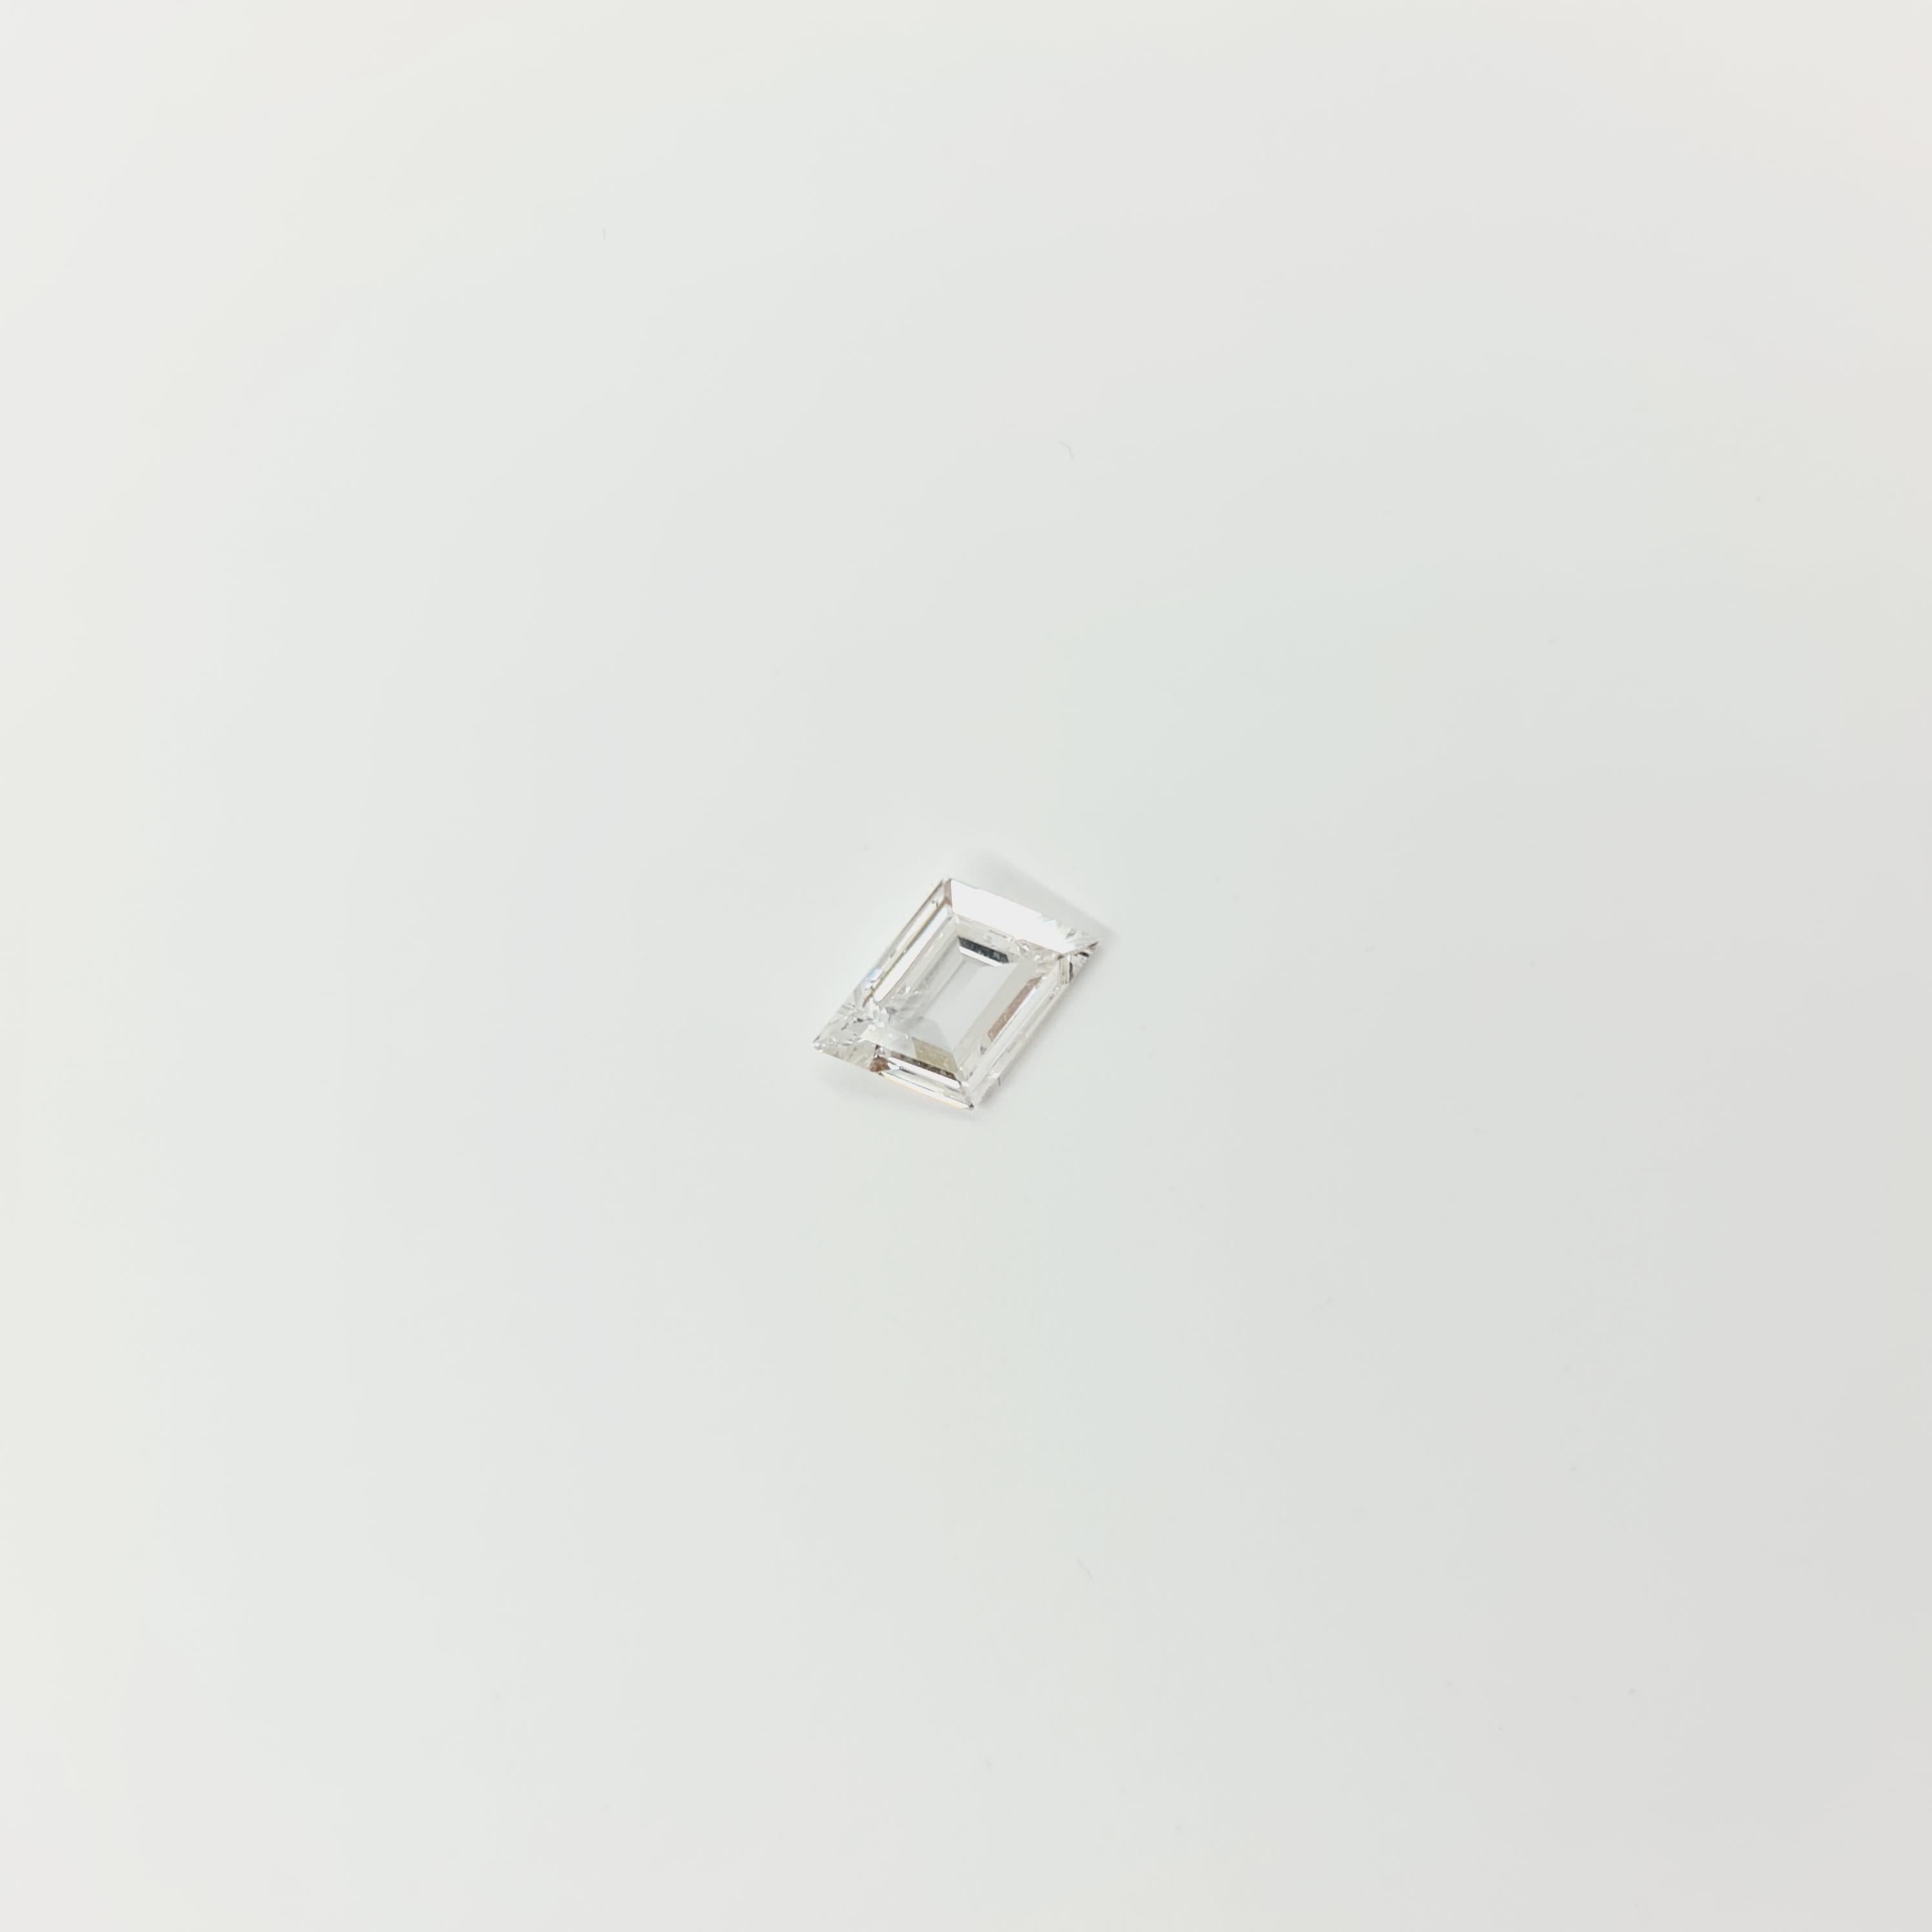 Parallelogram Cut Diamond 0.60 G/IF Solitaire Ring 750 Gold in 4 Prong Setting In New Condition For Sale In Darmstadt, DE